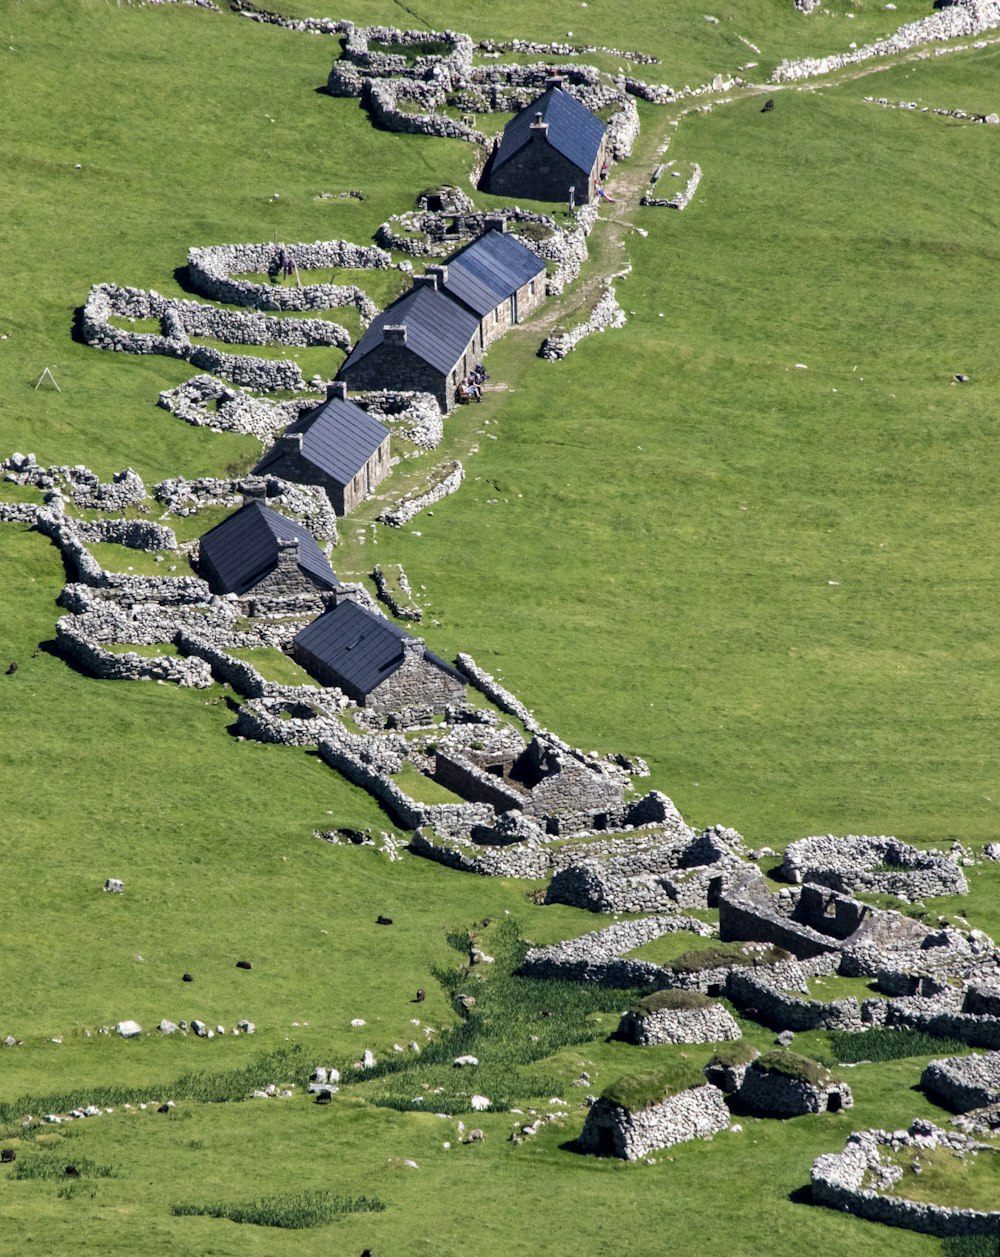 an aerial view of a stone building in a green field